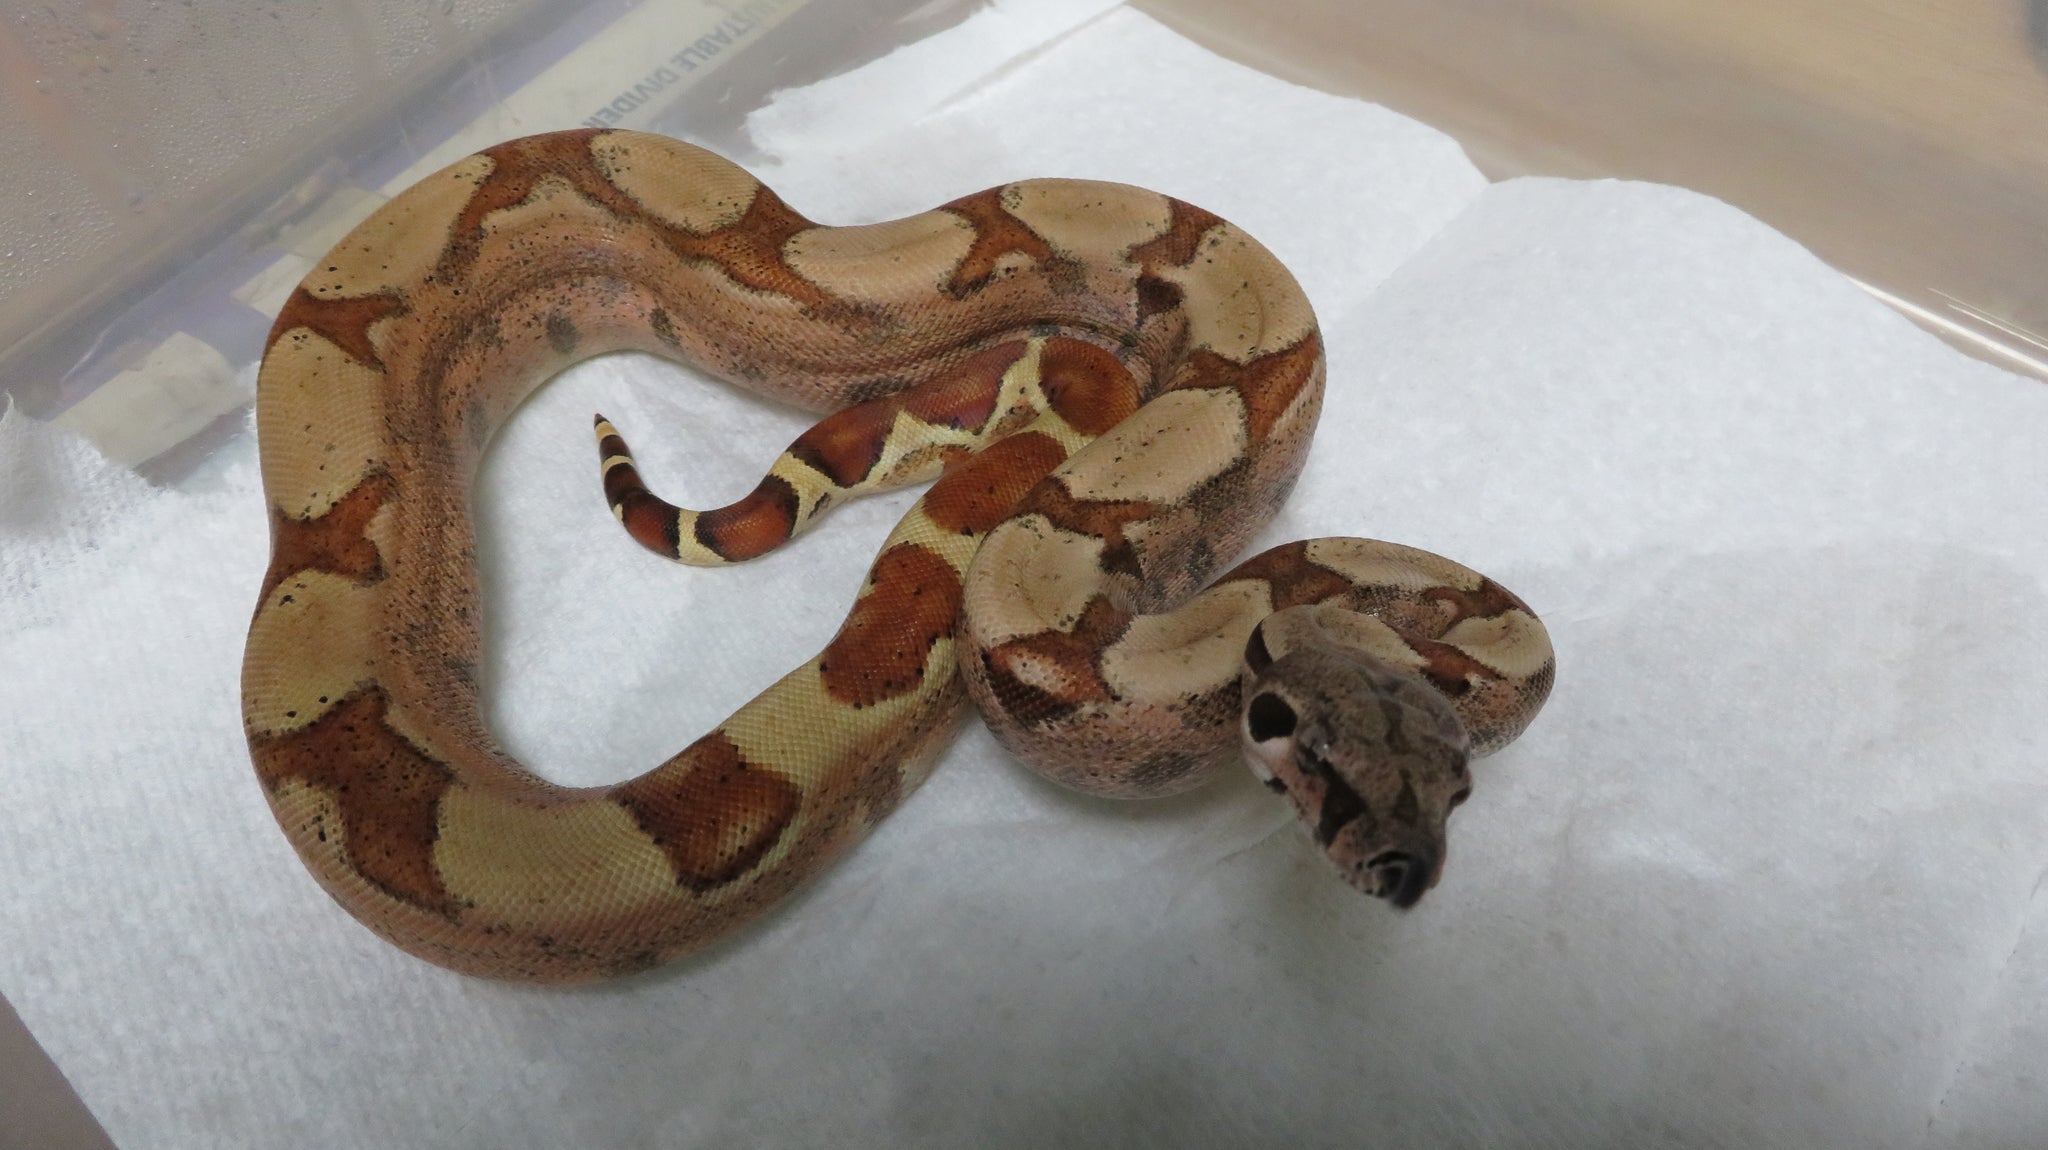 How much do red tail boas cost? Find out at